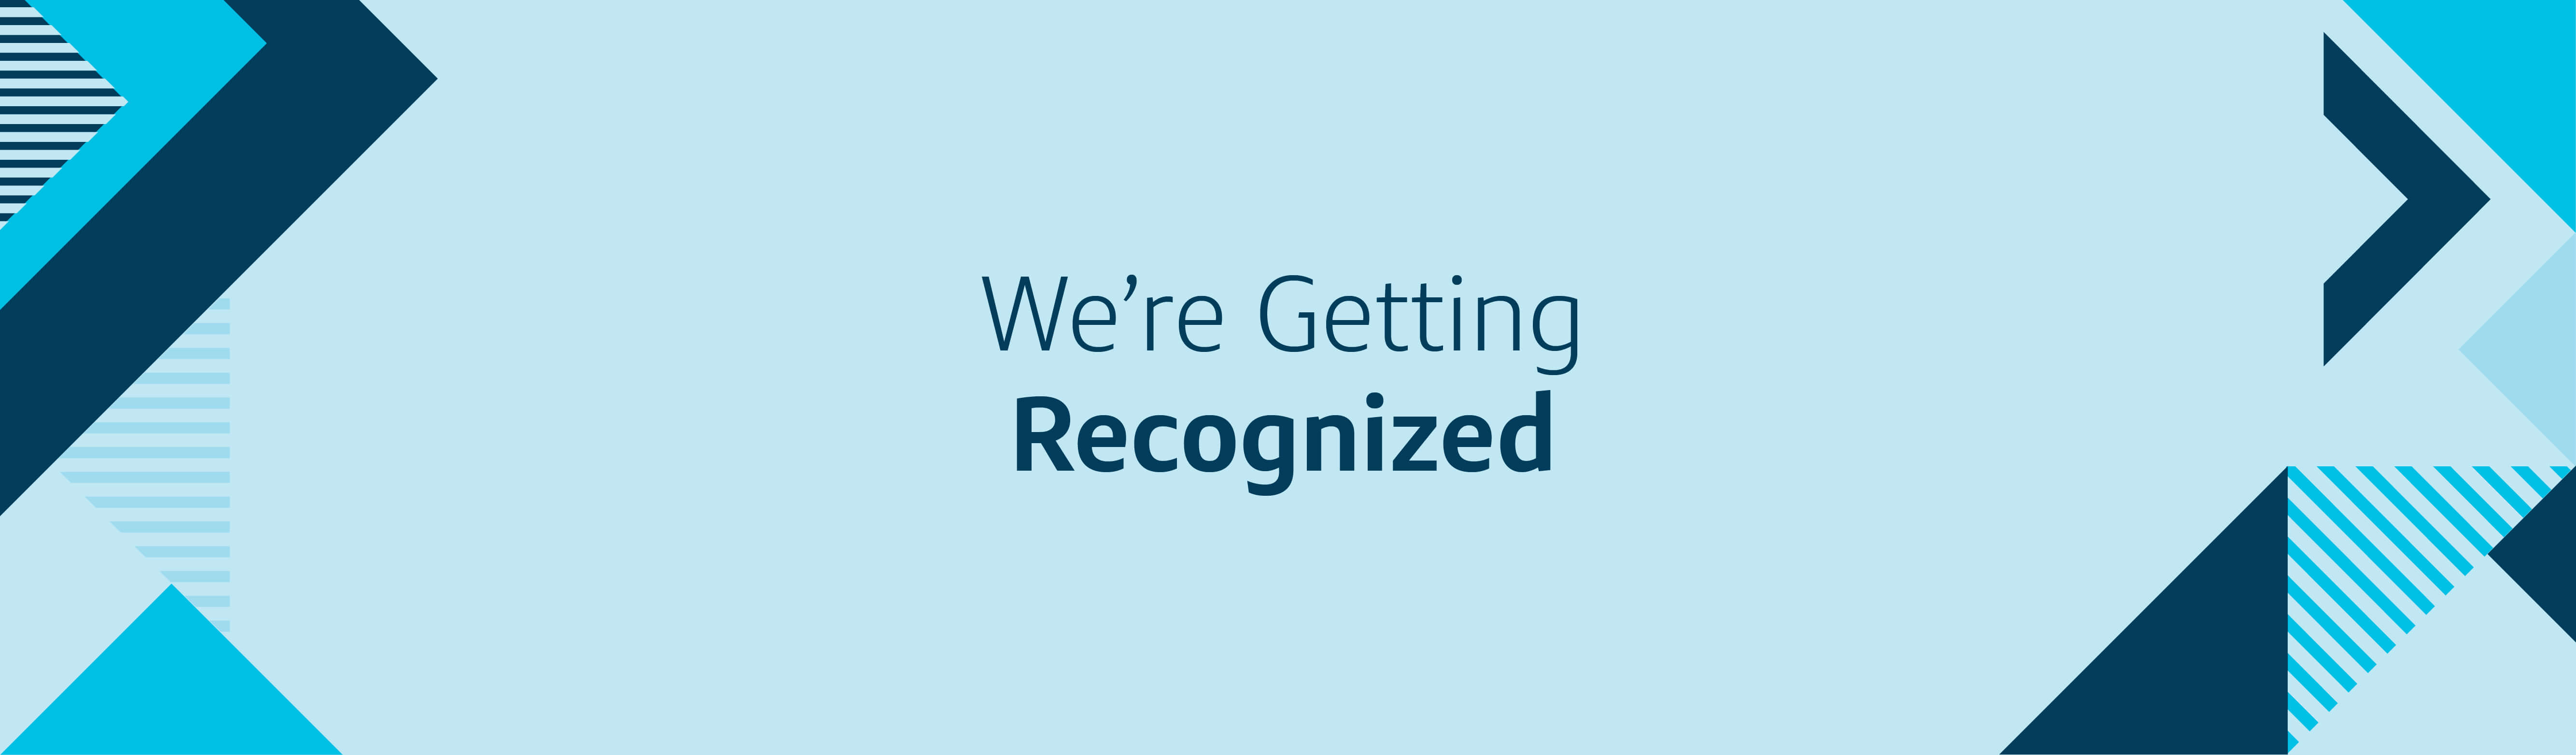 A Capital One blue image with triangular graphic design that says "We're Getting Recognized"